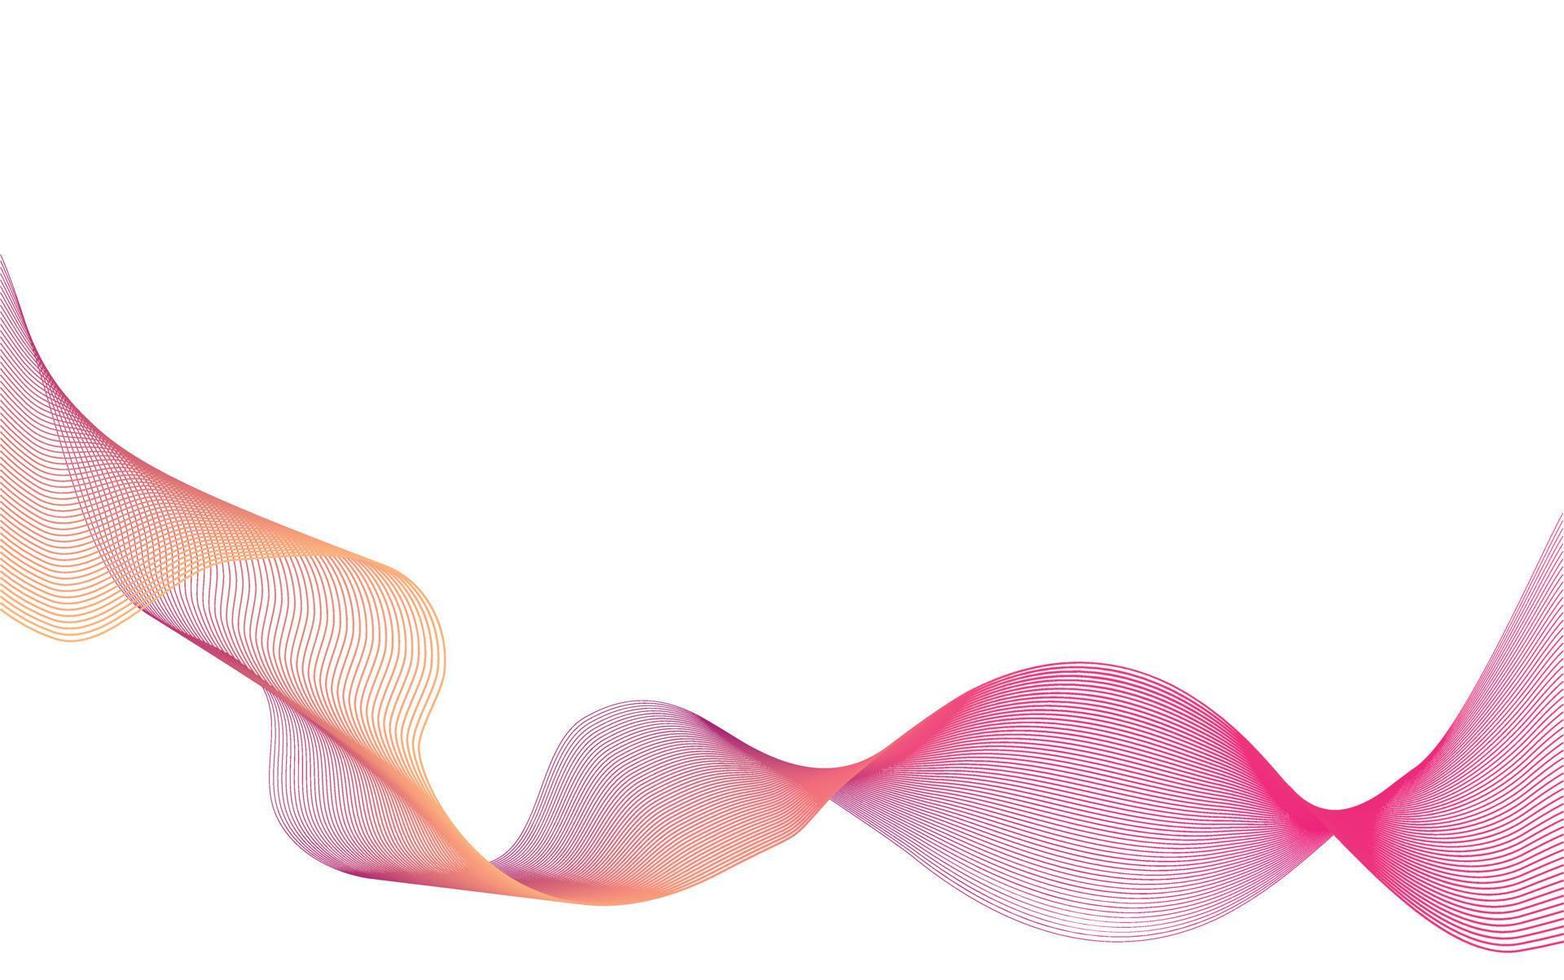 Abstract wave element for design. Digital frequency track equalizer. Stylized line art background. Colorful shiny wave with lines created using blend tool. Curved wavy line, smooth stripe.Vector.White vector